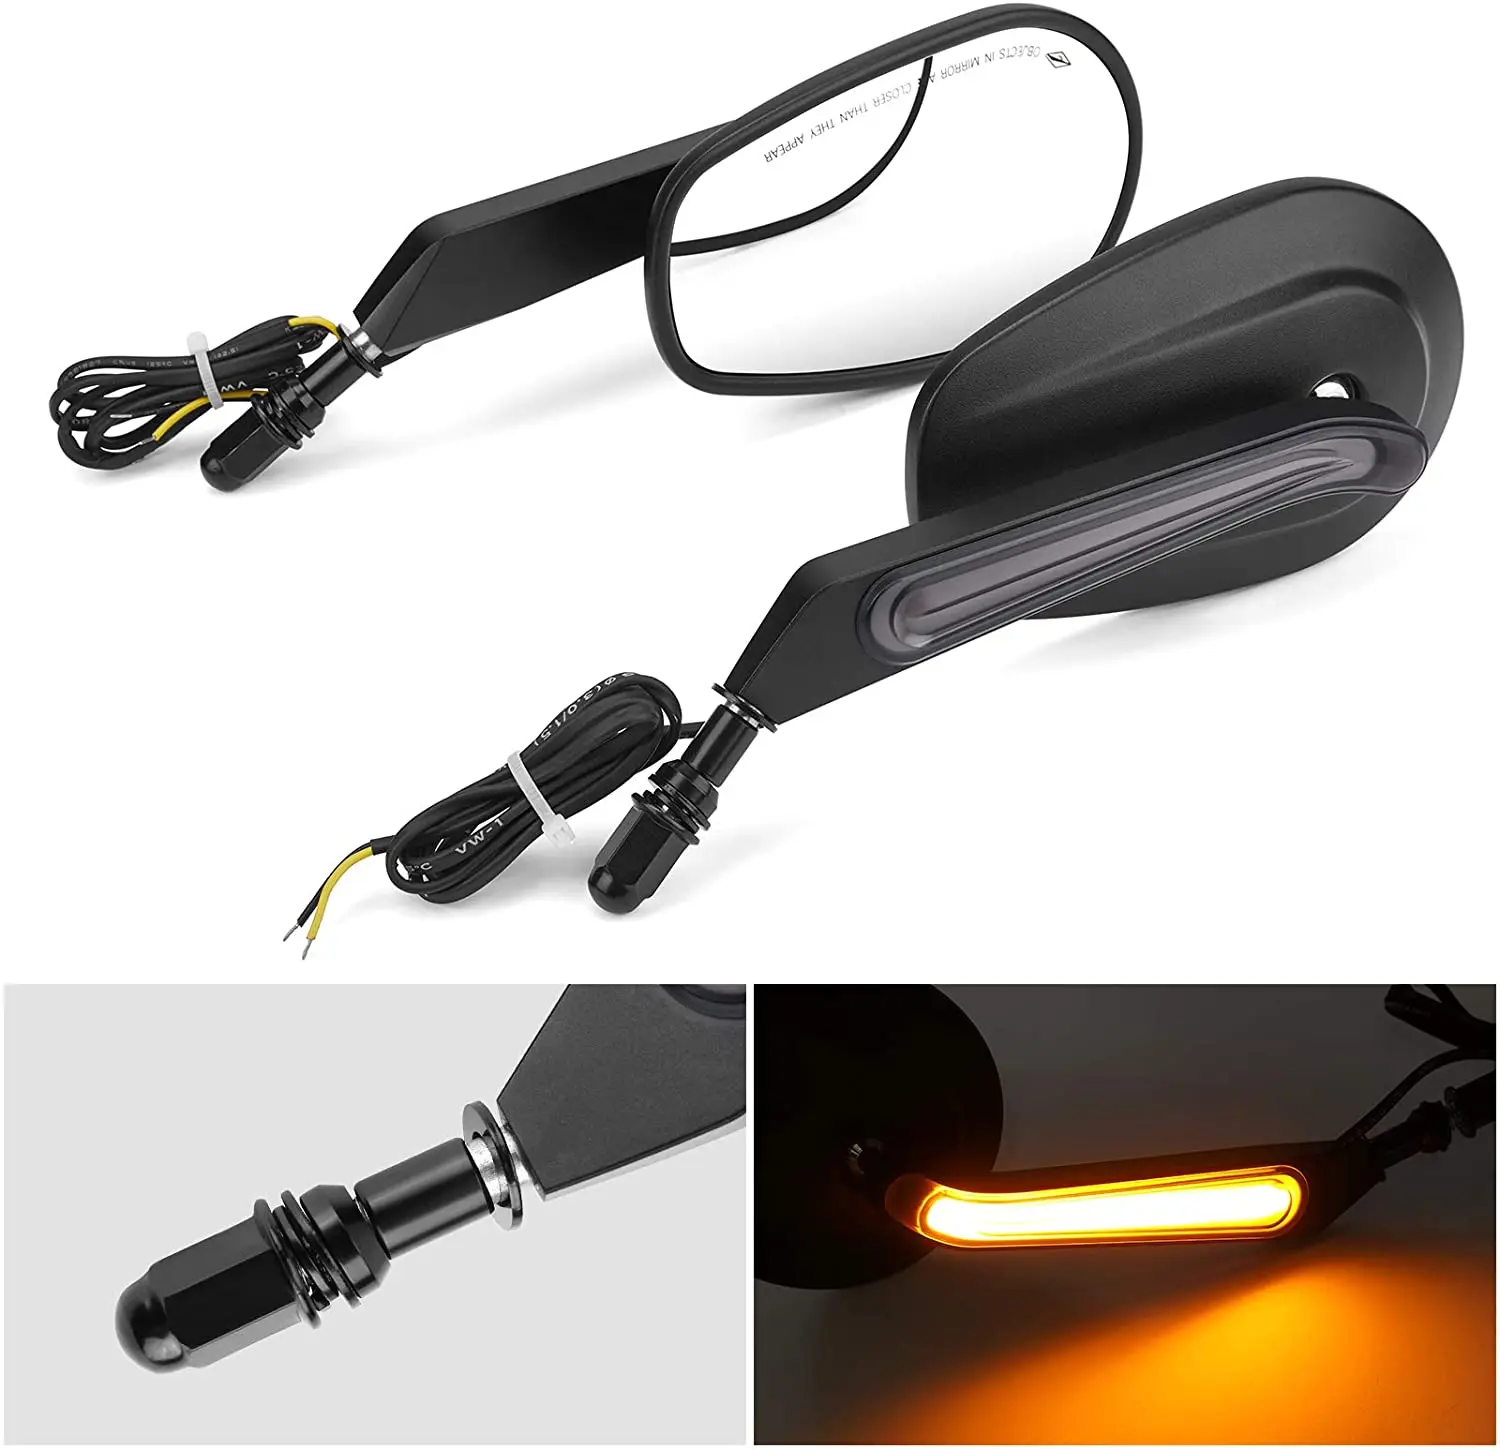 Rear View Mirrors With LED Turn Signals For Touring Sportster Dyna Softail Street Glide Road King Road Glide Electra Glide Side enlarge